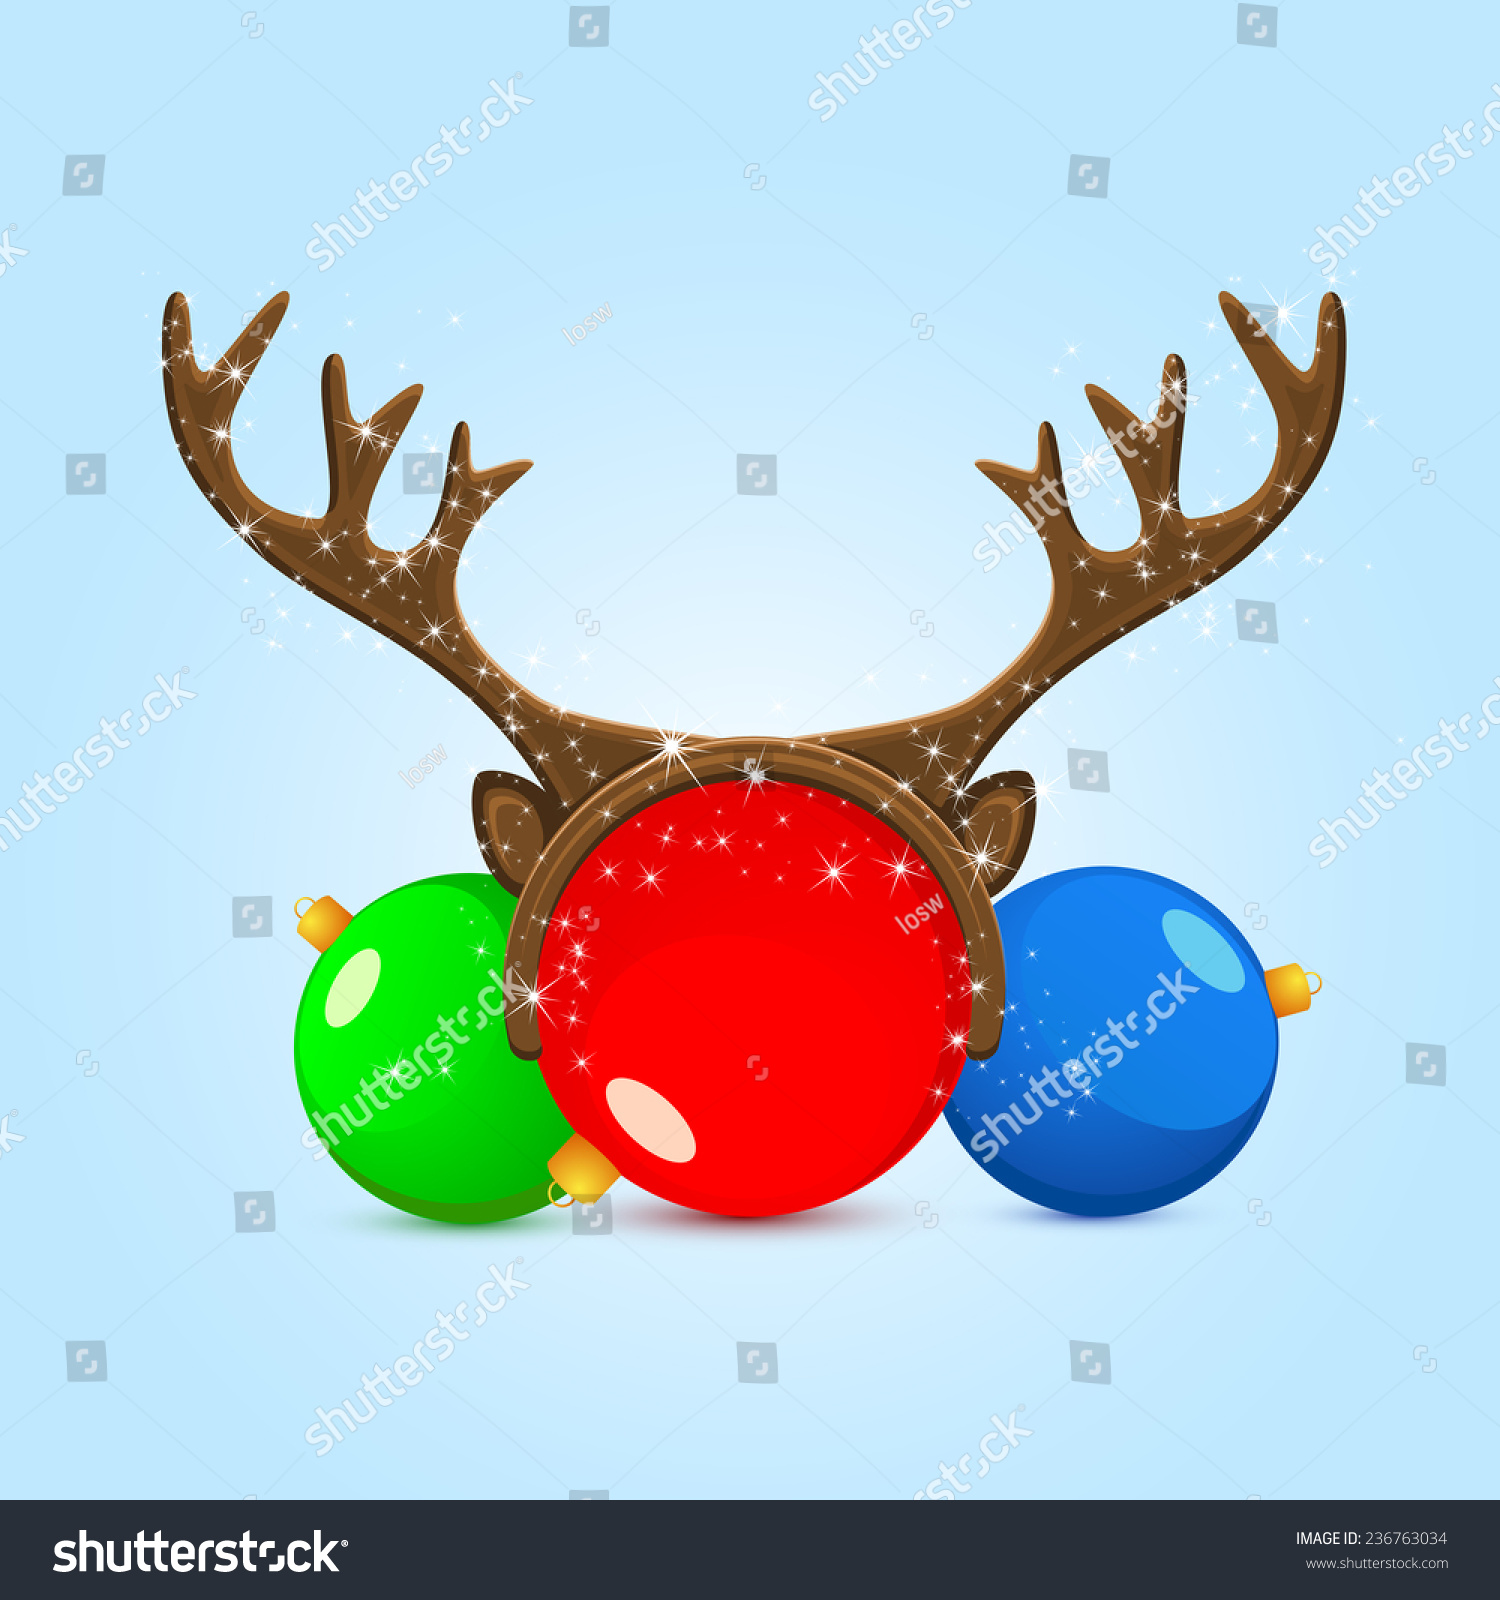 Funny mask with reindeer horns on Christmas ball, illustration. #236763034